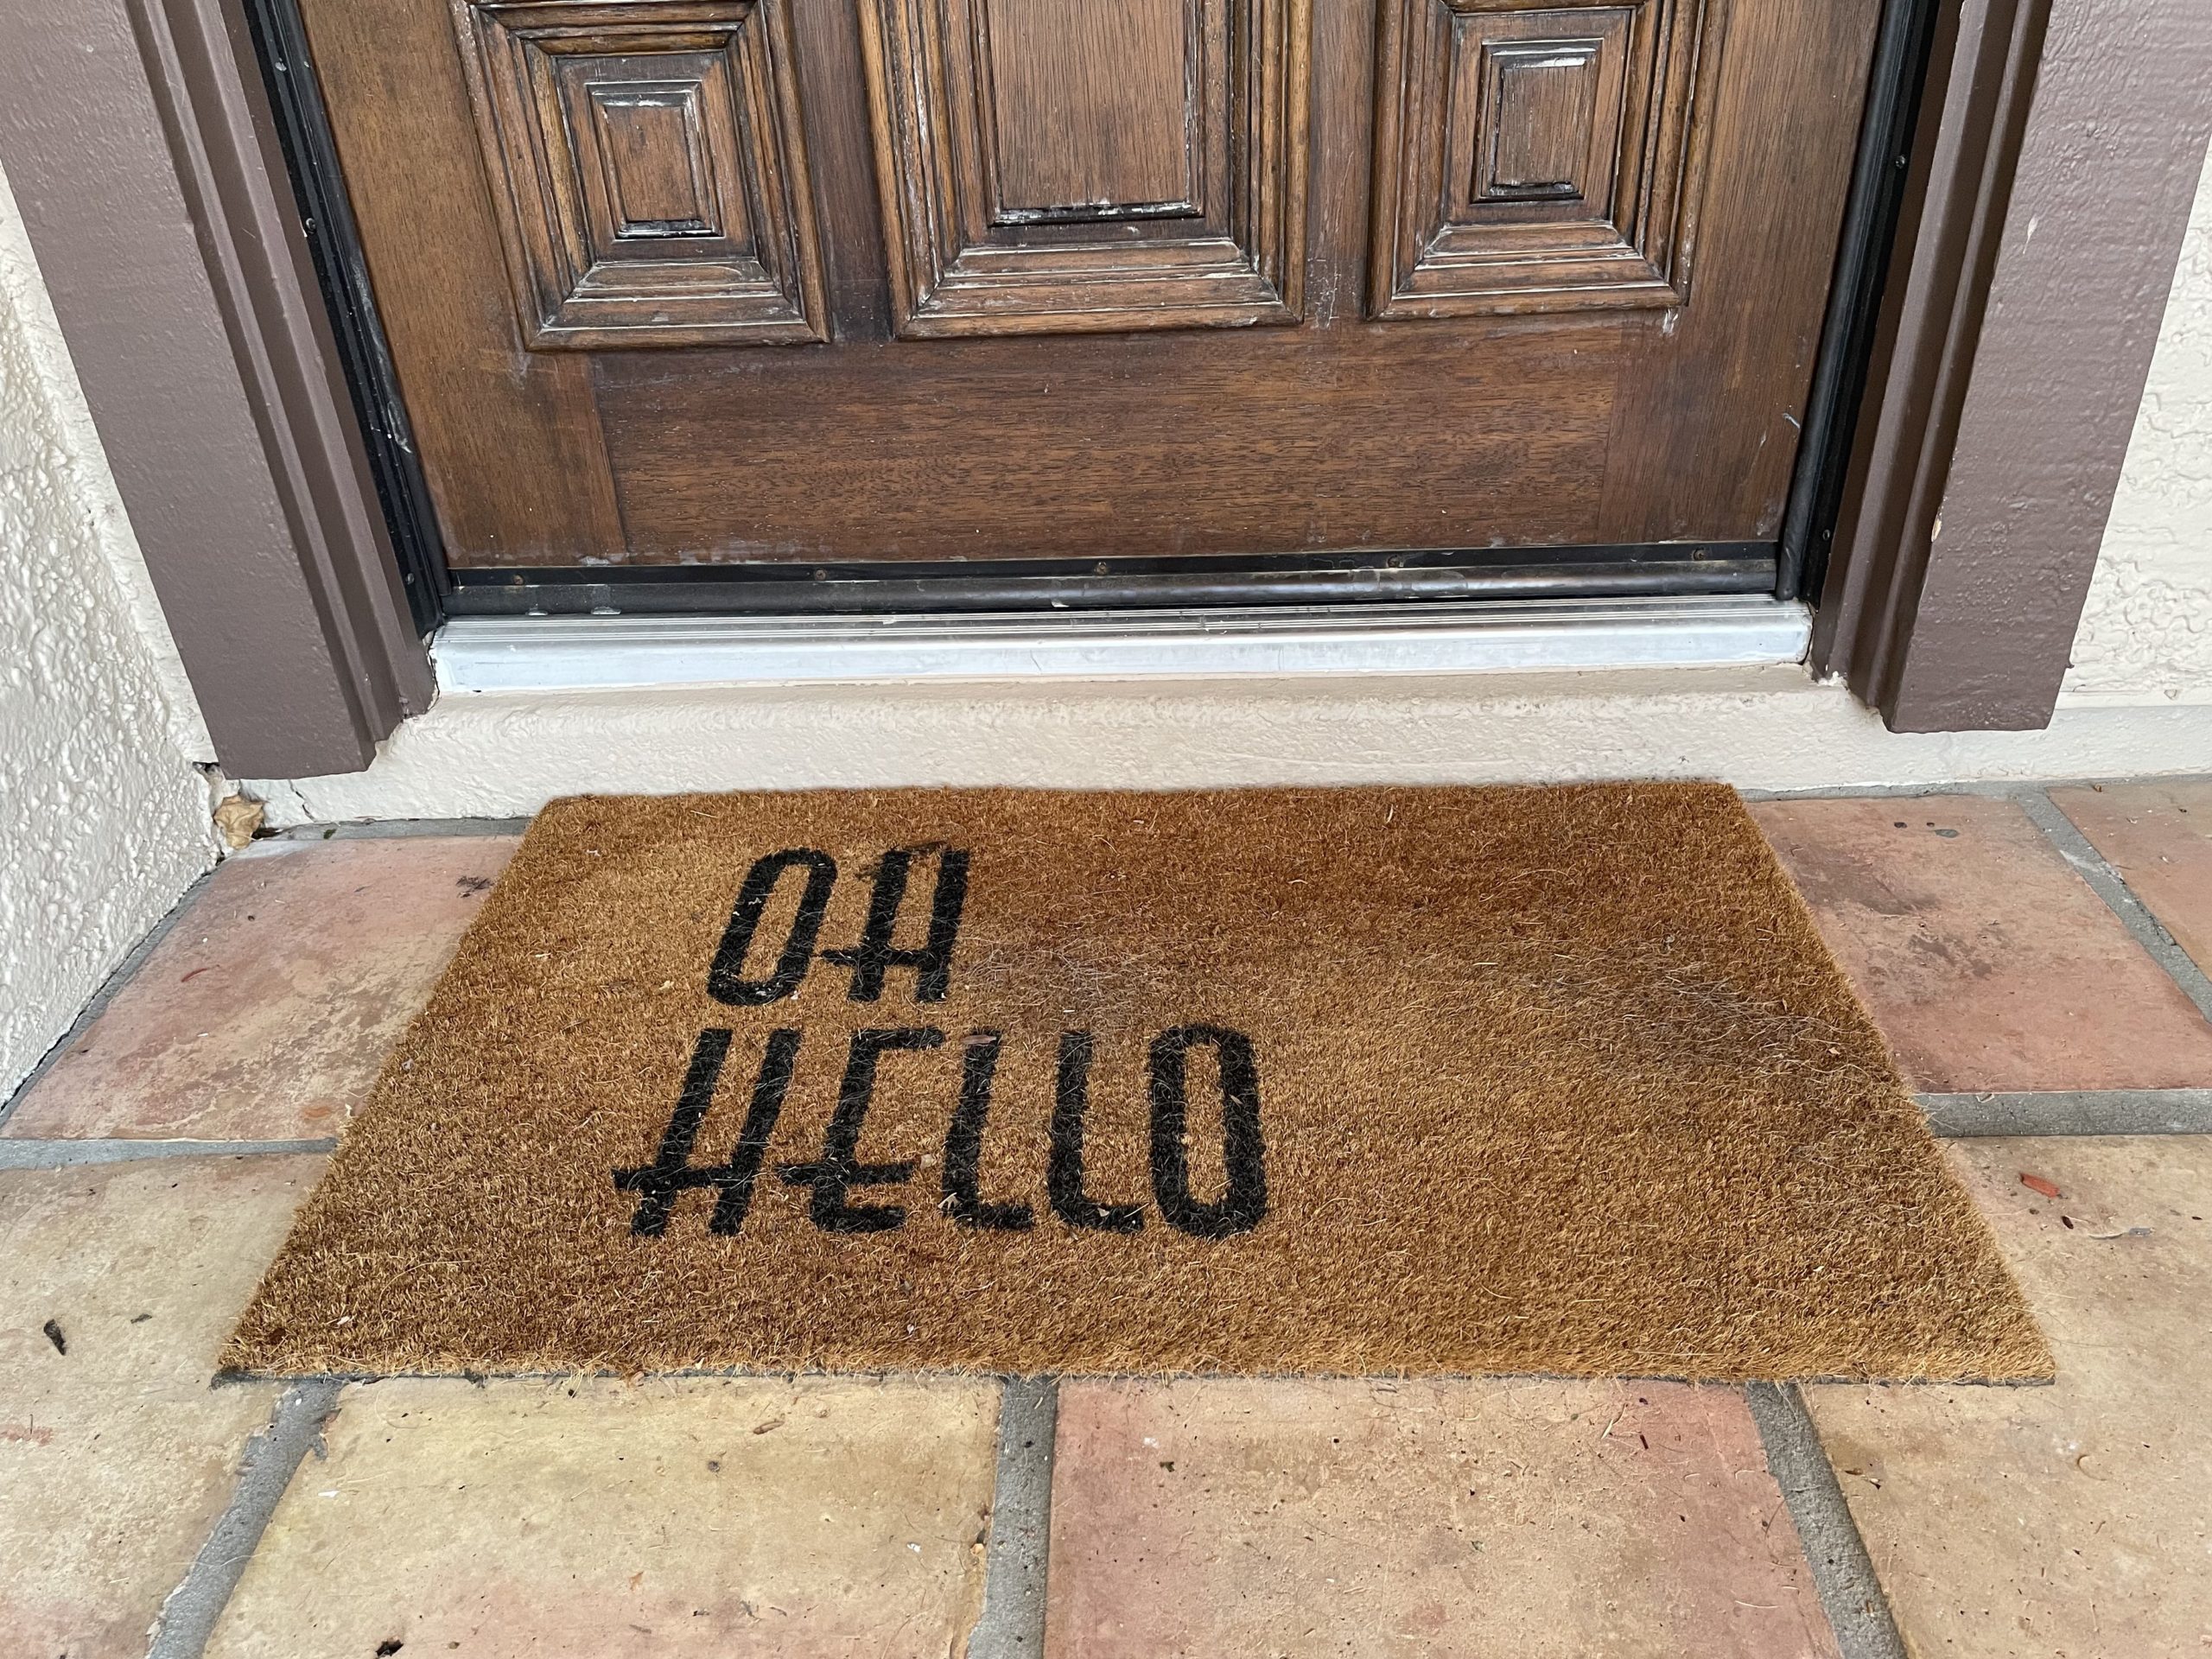 Front door with brown welcome mat that reads "Oh, Hello"